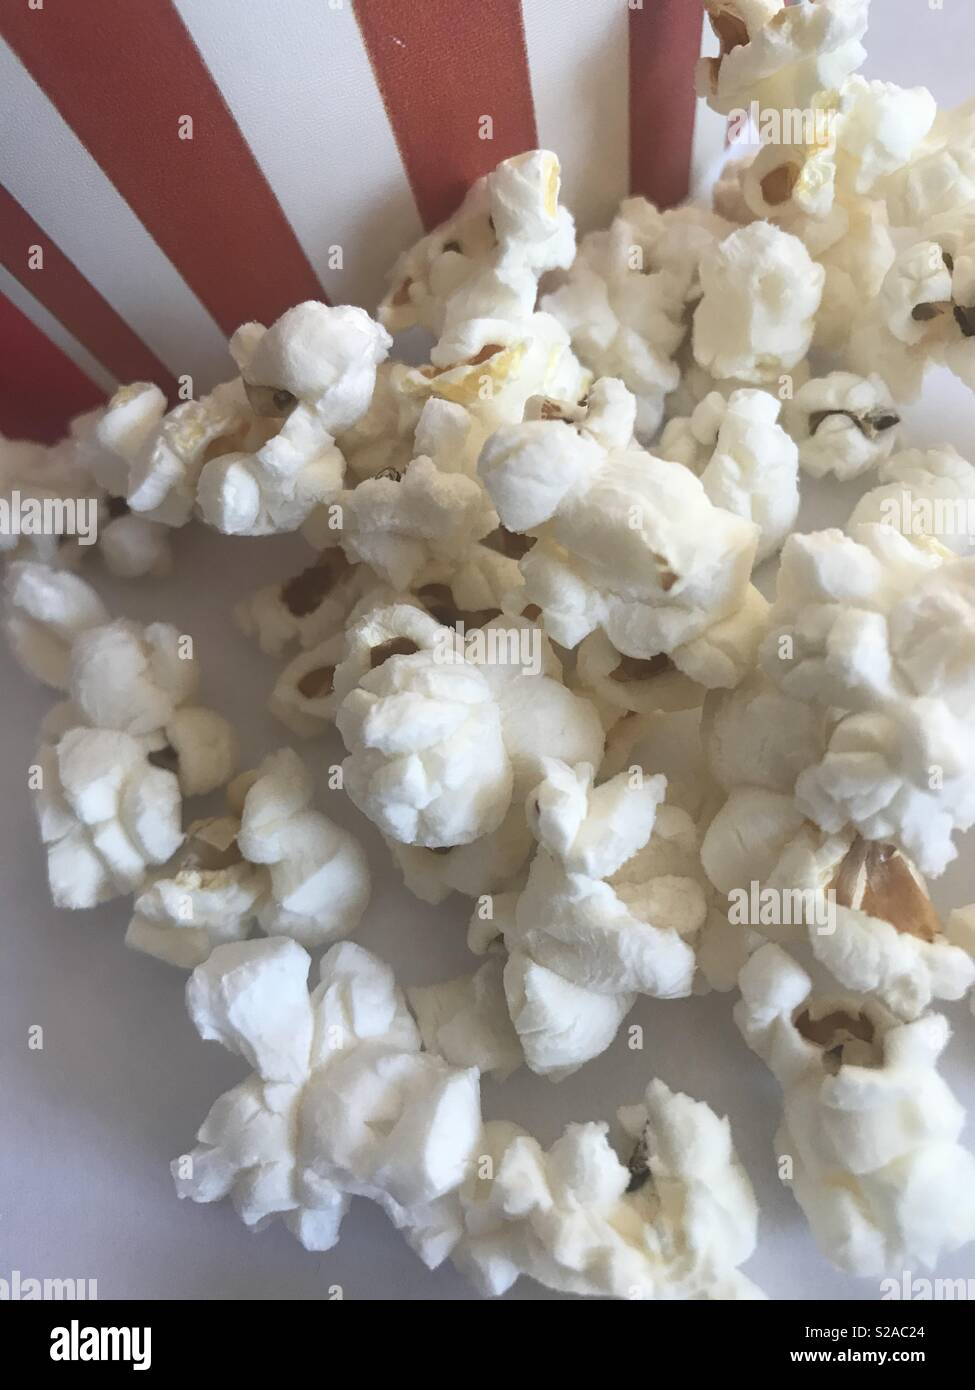 Grab a bowl of delicious white and fluffy golden and tasty American movie theater popcorn in a red and white bucket let’s go to the movies Stock Photo